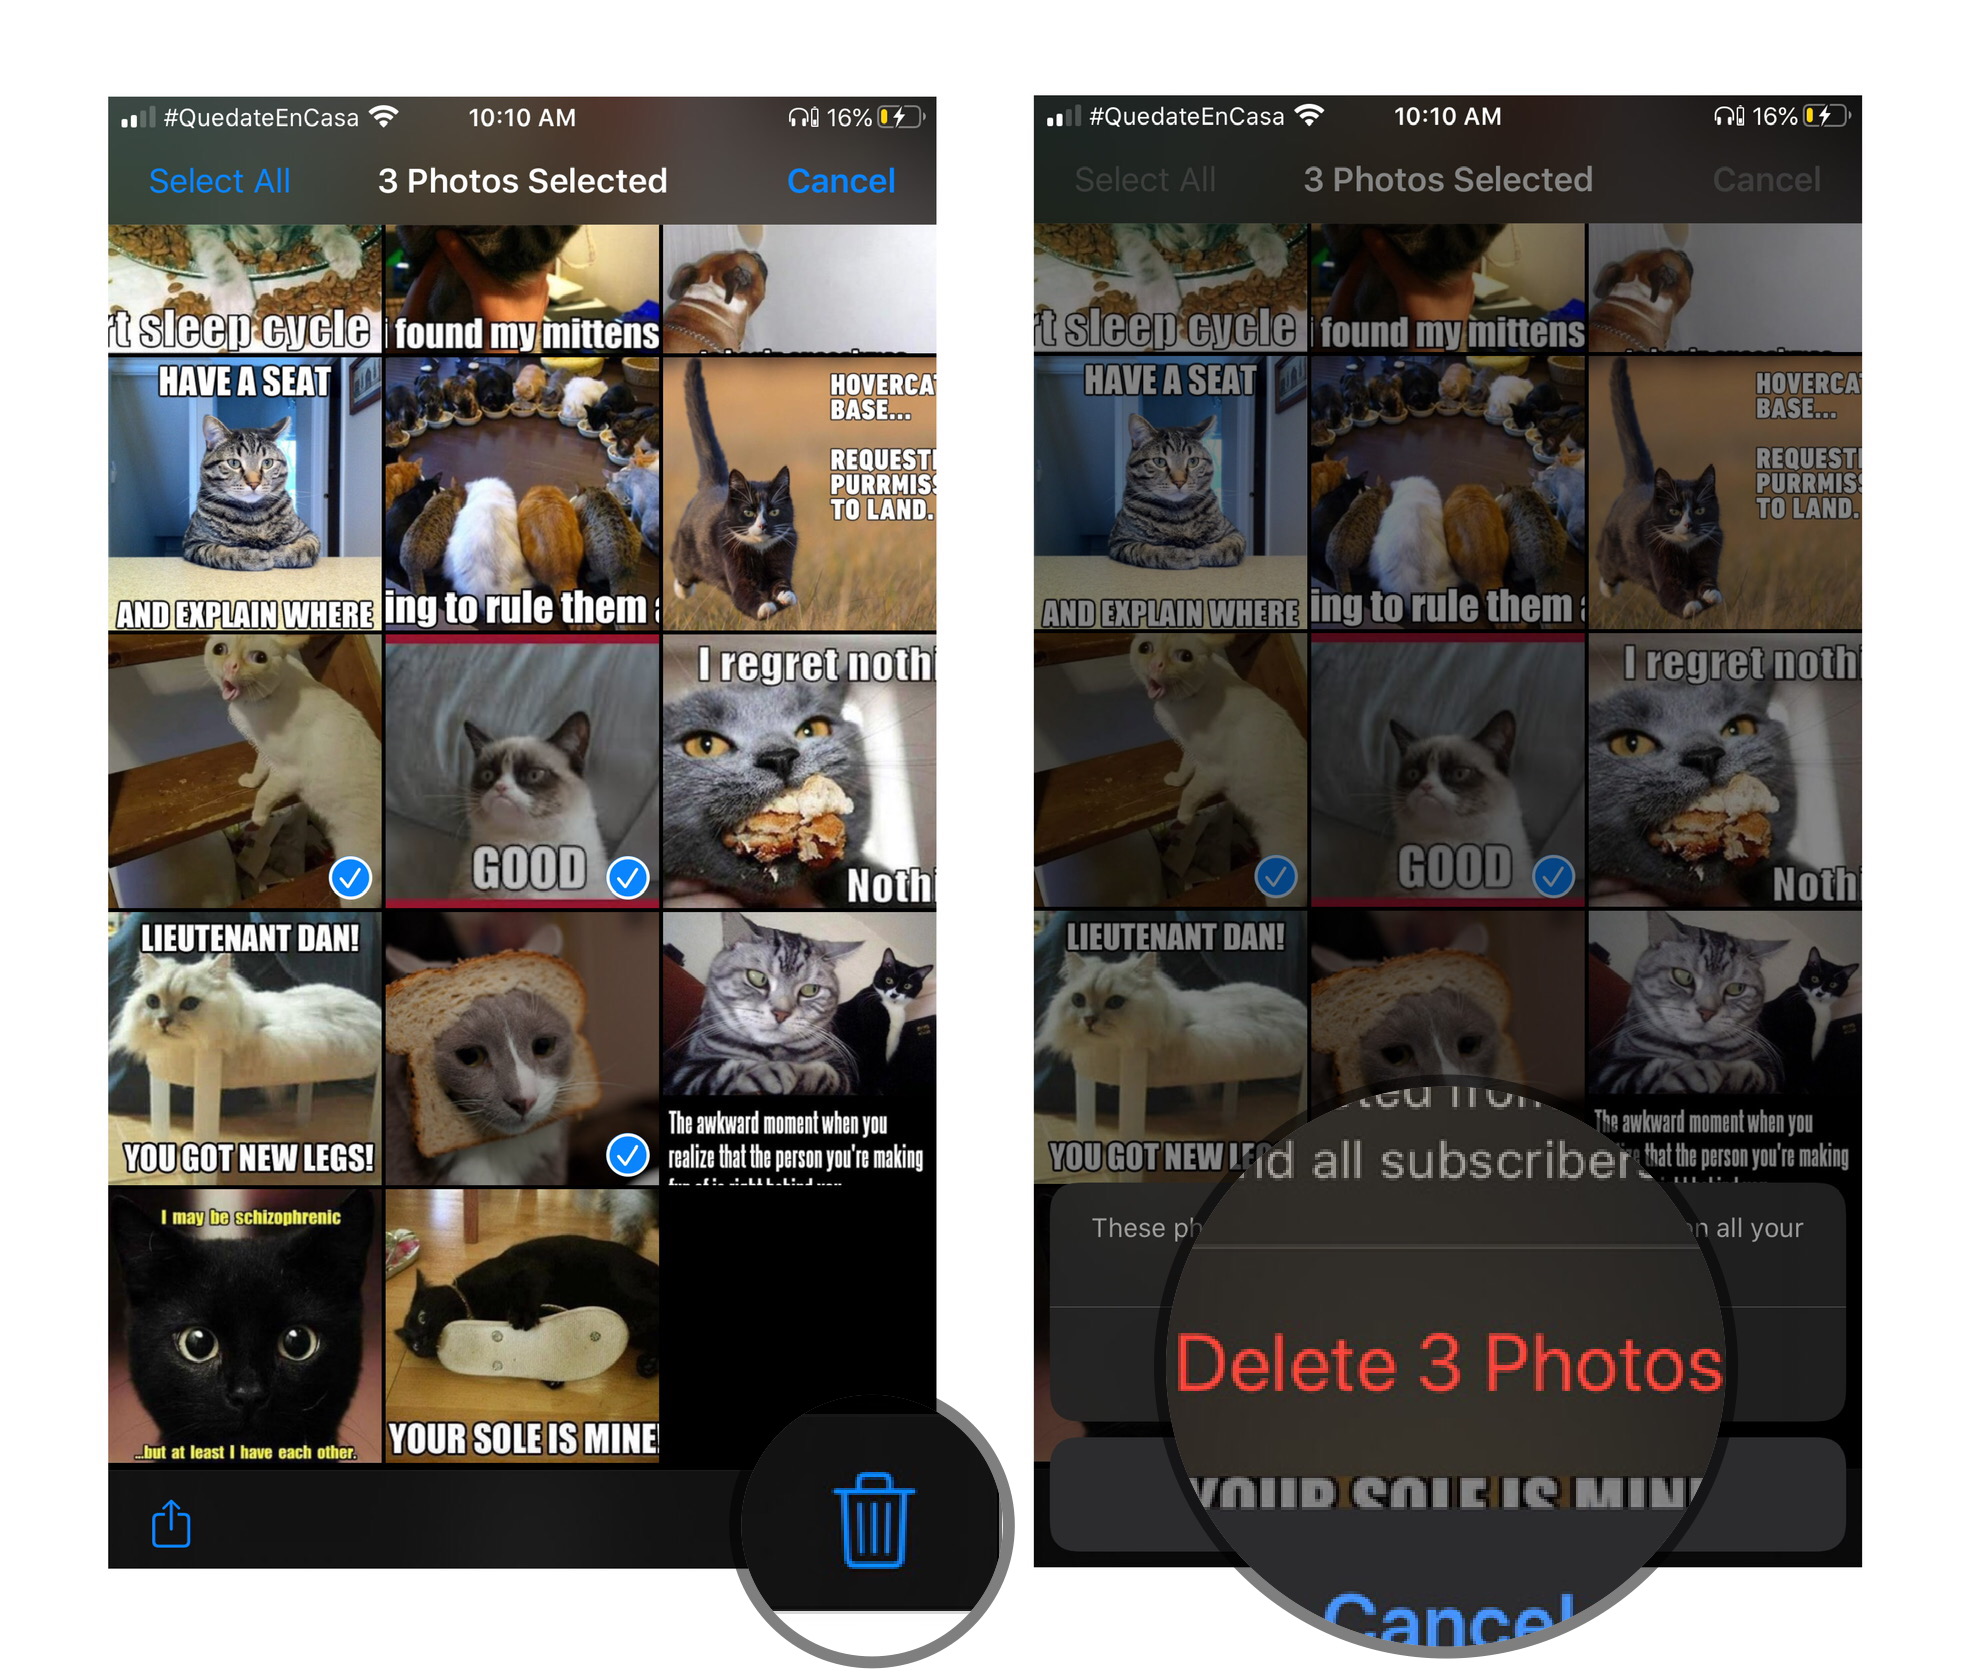 Delete images from a Shared Photo Album on iPhone and iPad by showing steps: Select photos, tap Trash icon, confirm by tapping Delete